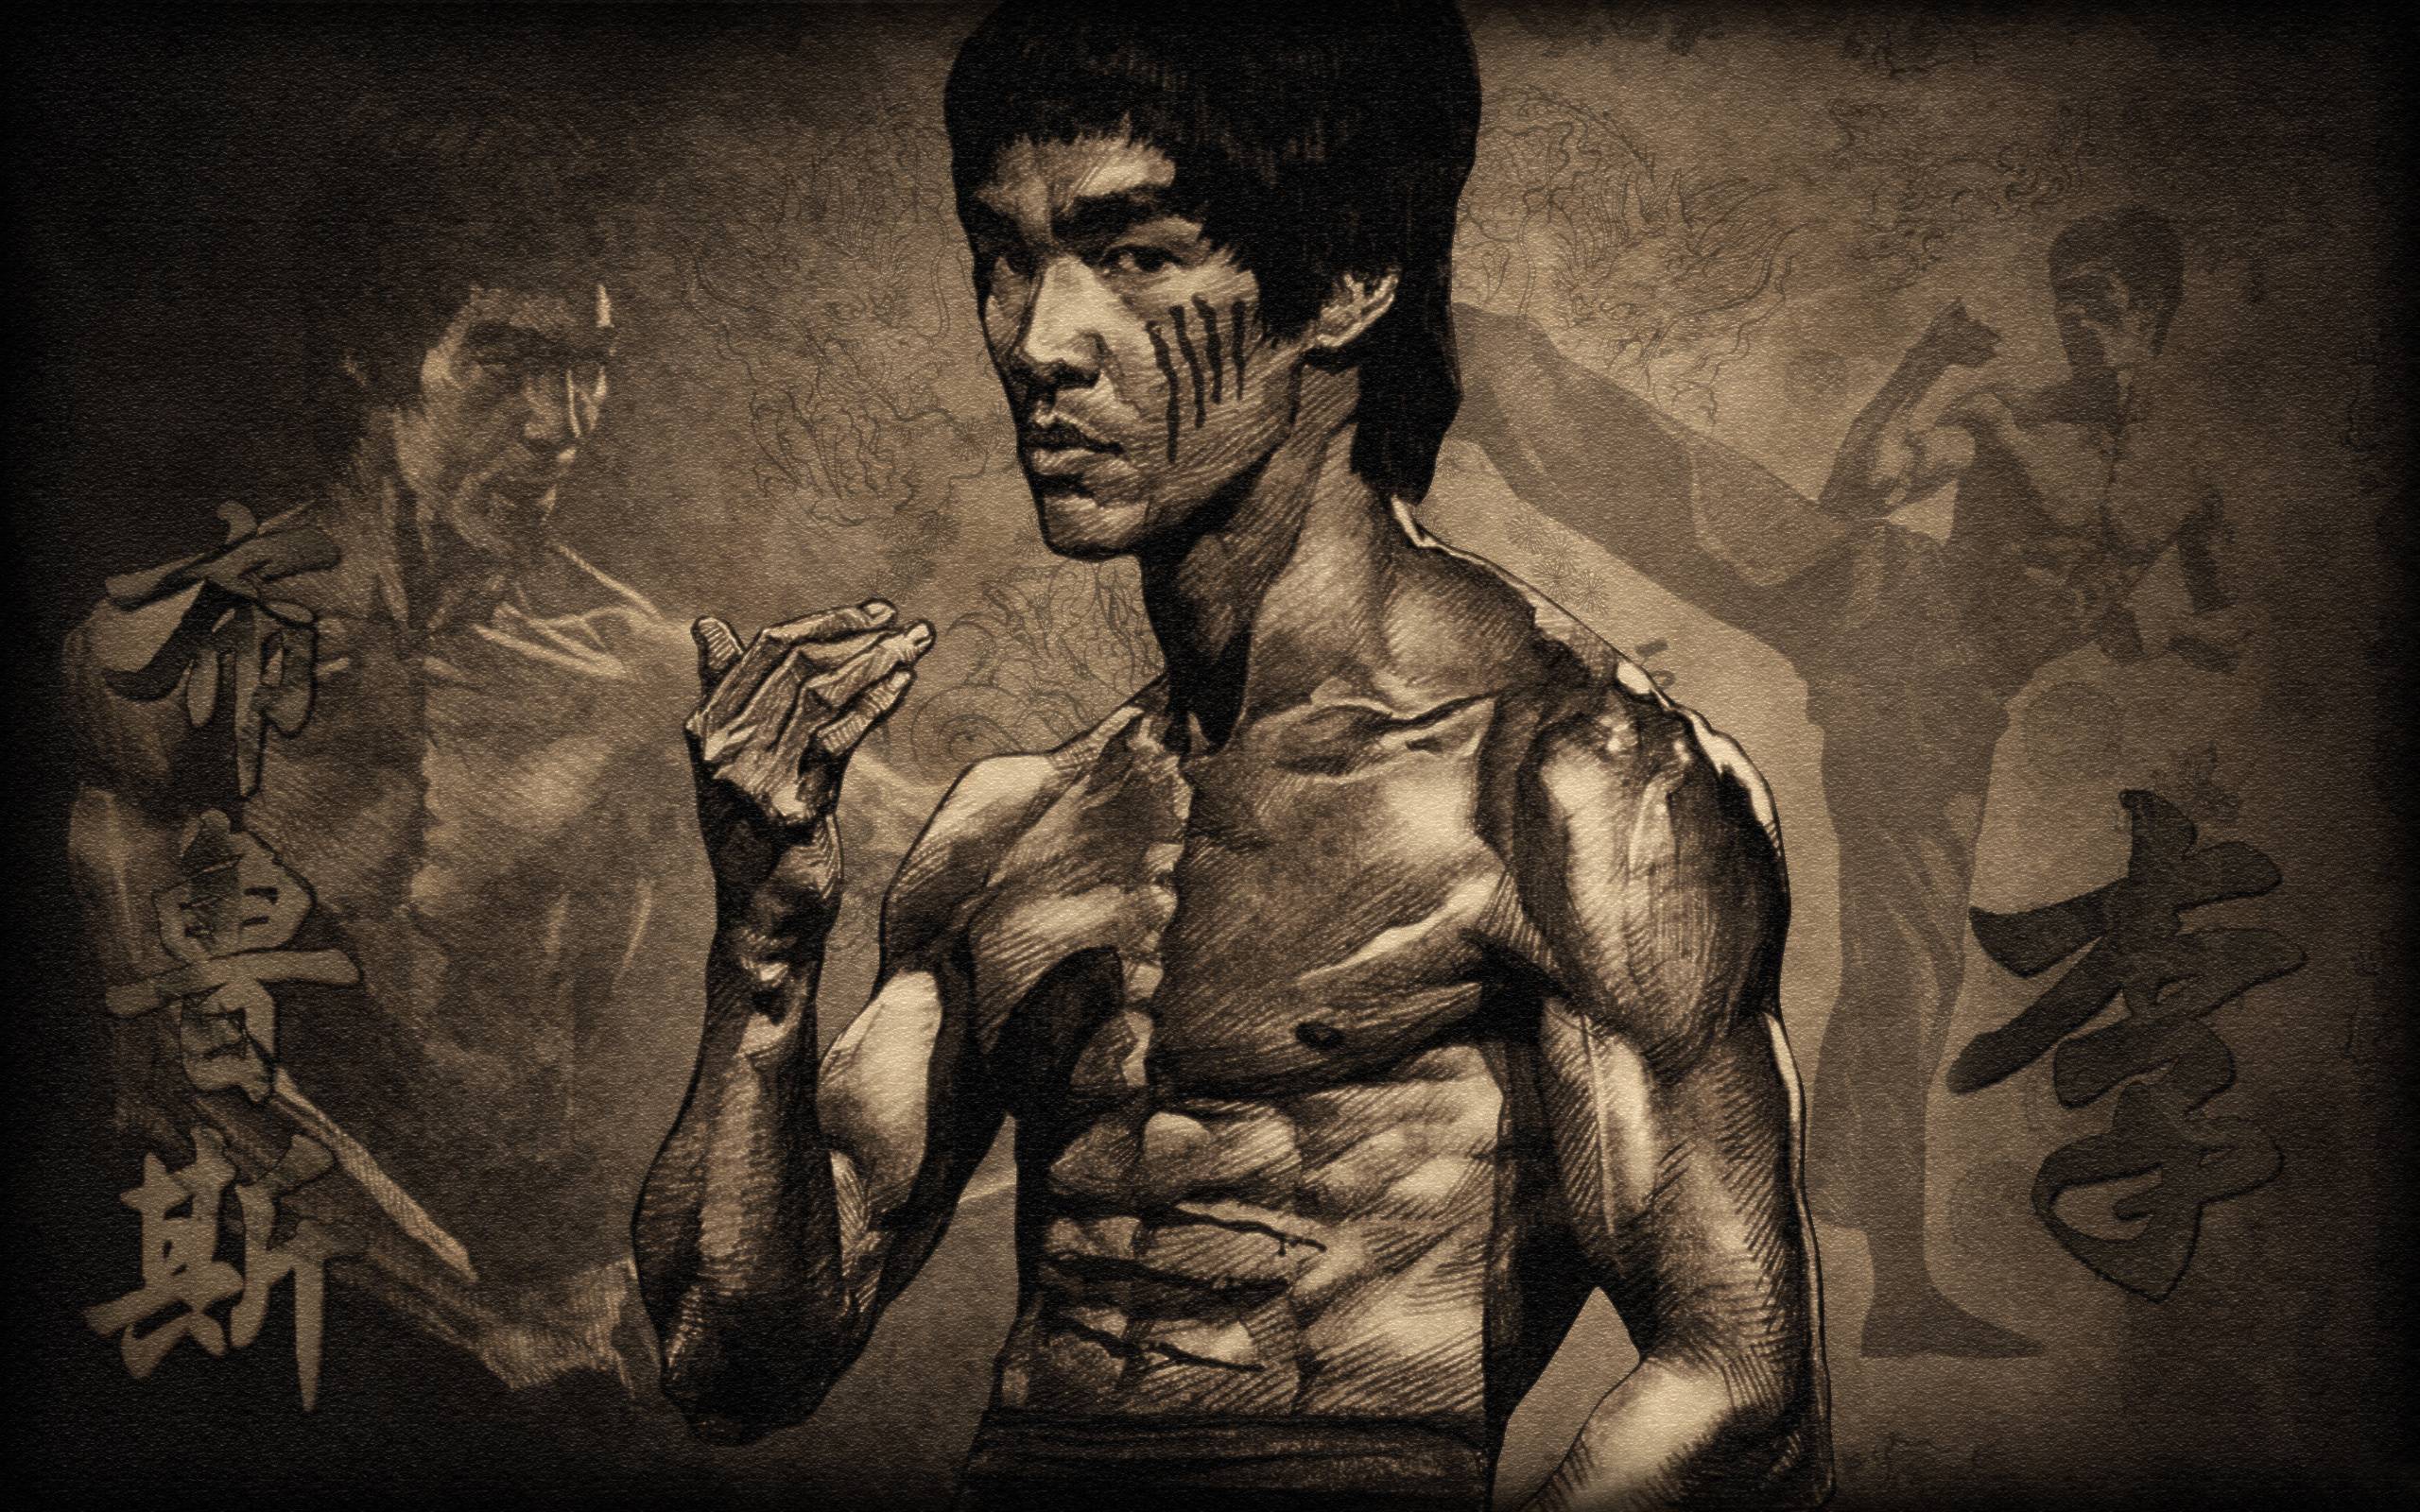 Bruce Lee Wallpaper, The Legend, Actor, Soldier, Kung Fu. HD